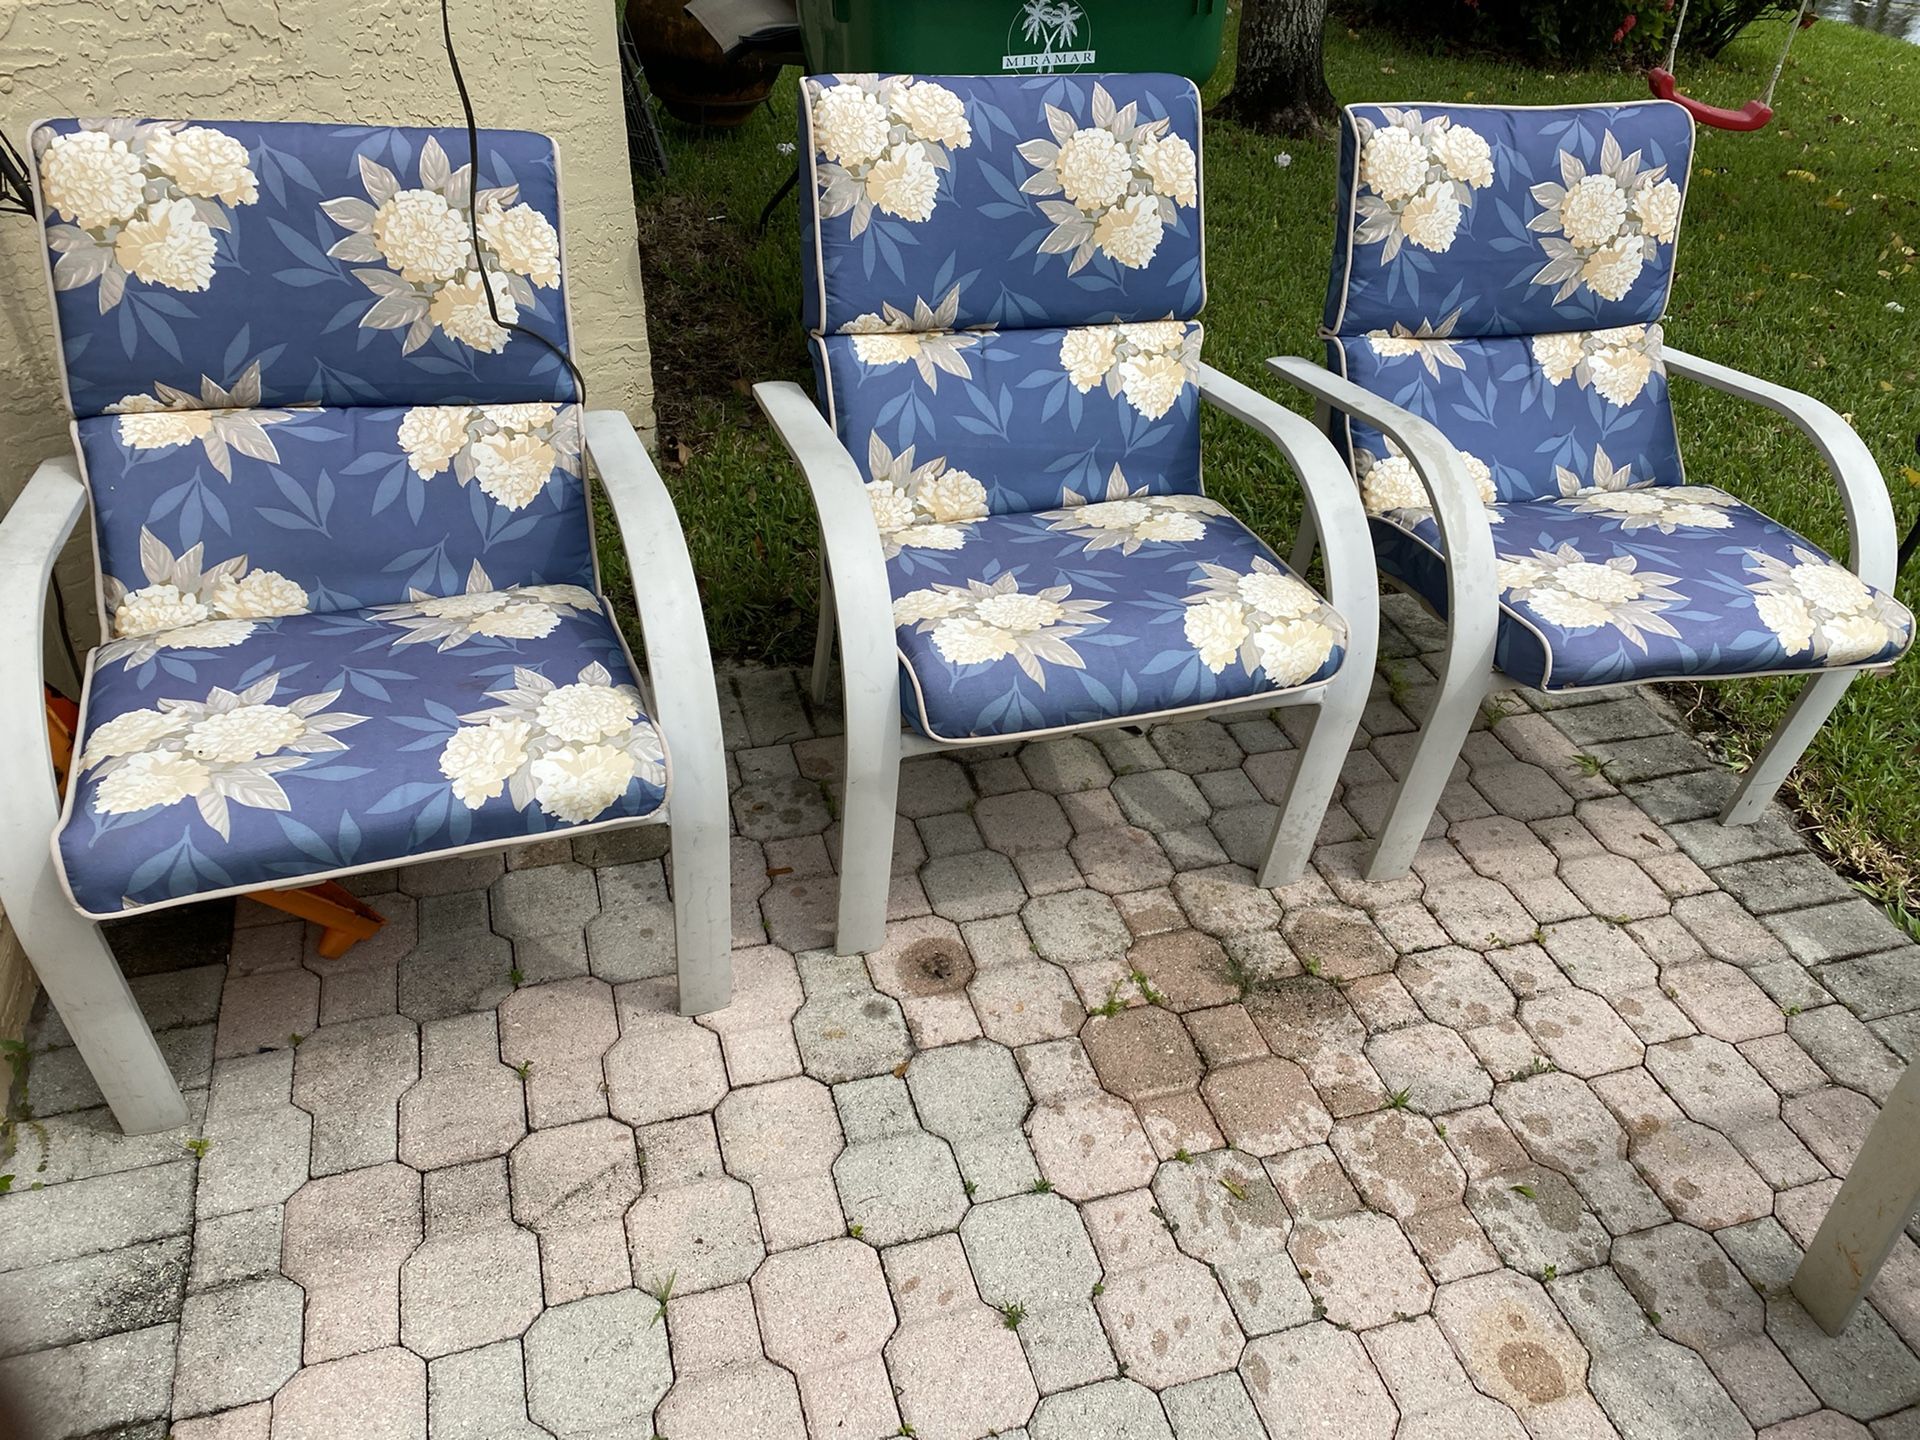 Patio Chair For Your House Or Business In Good Conditions Got 6 Just Like It 